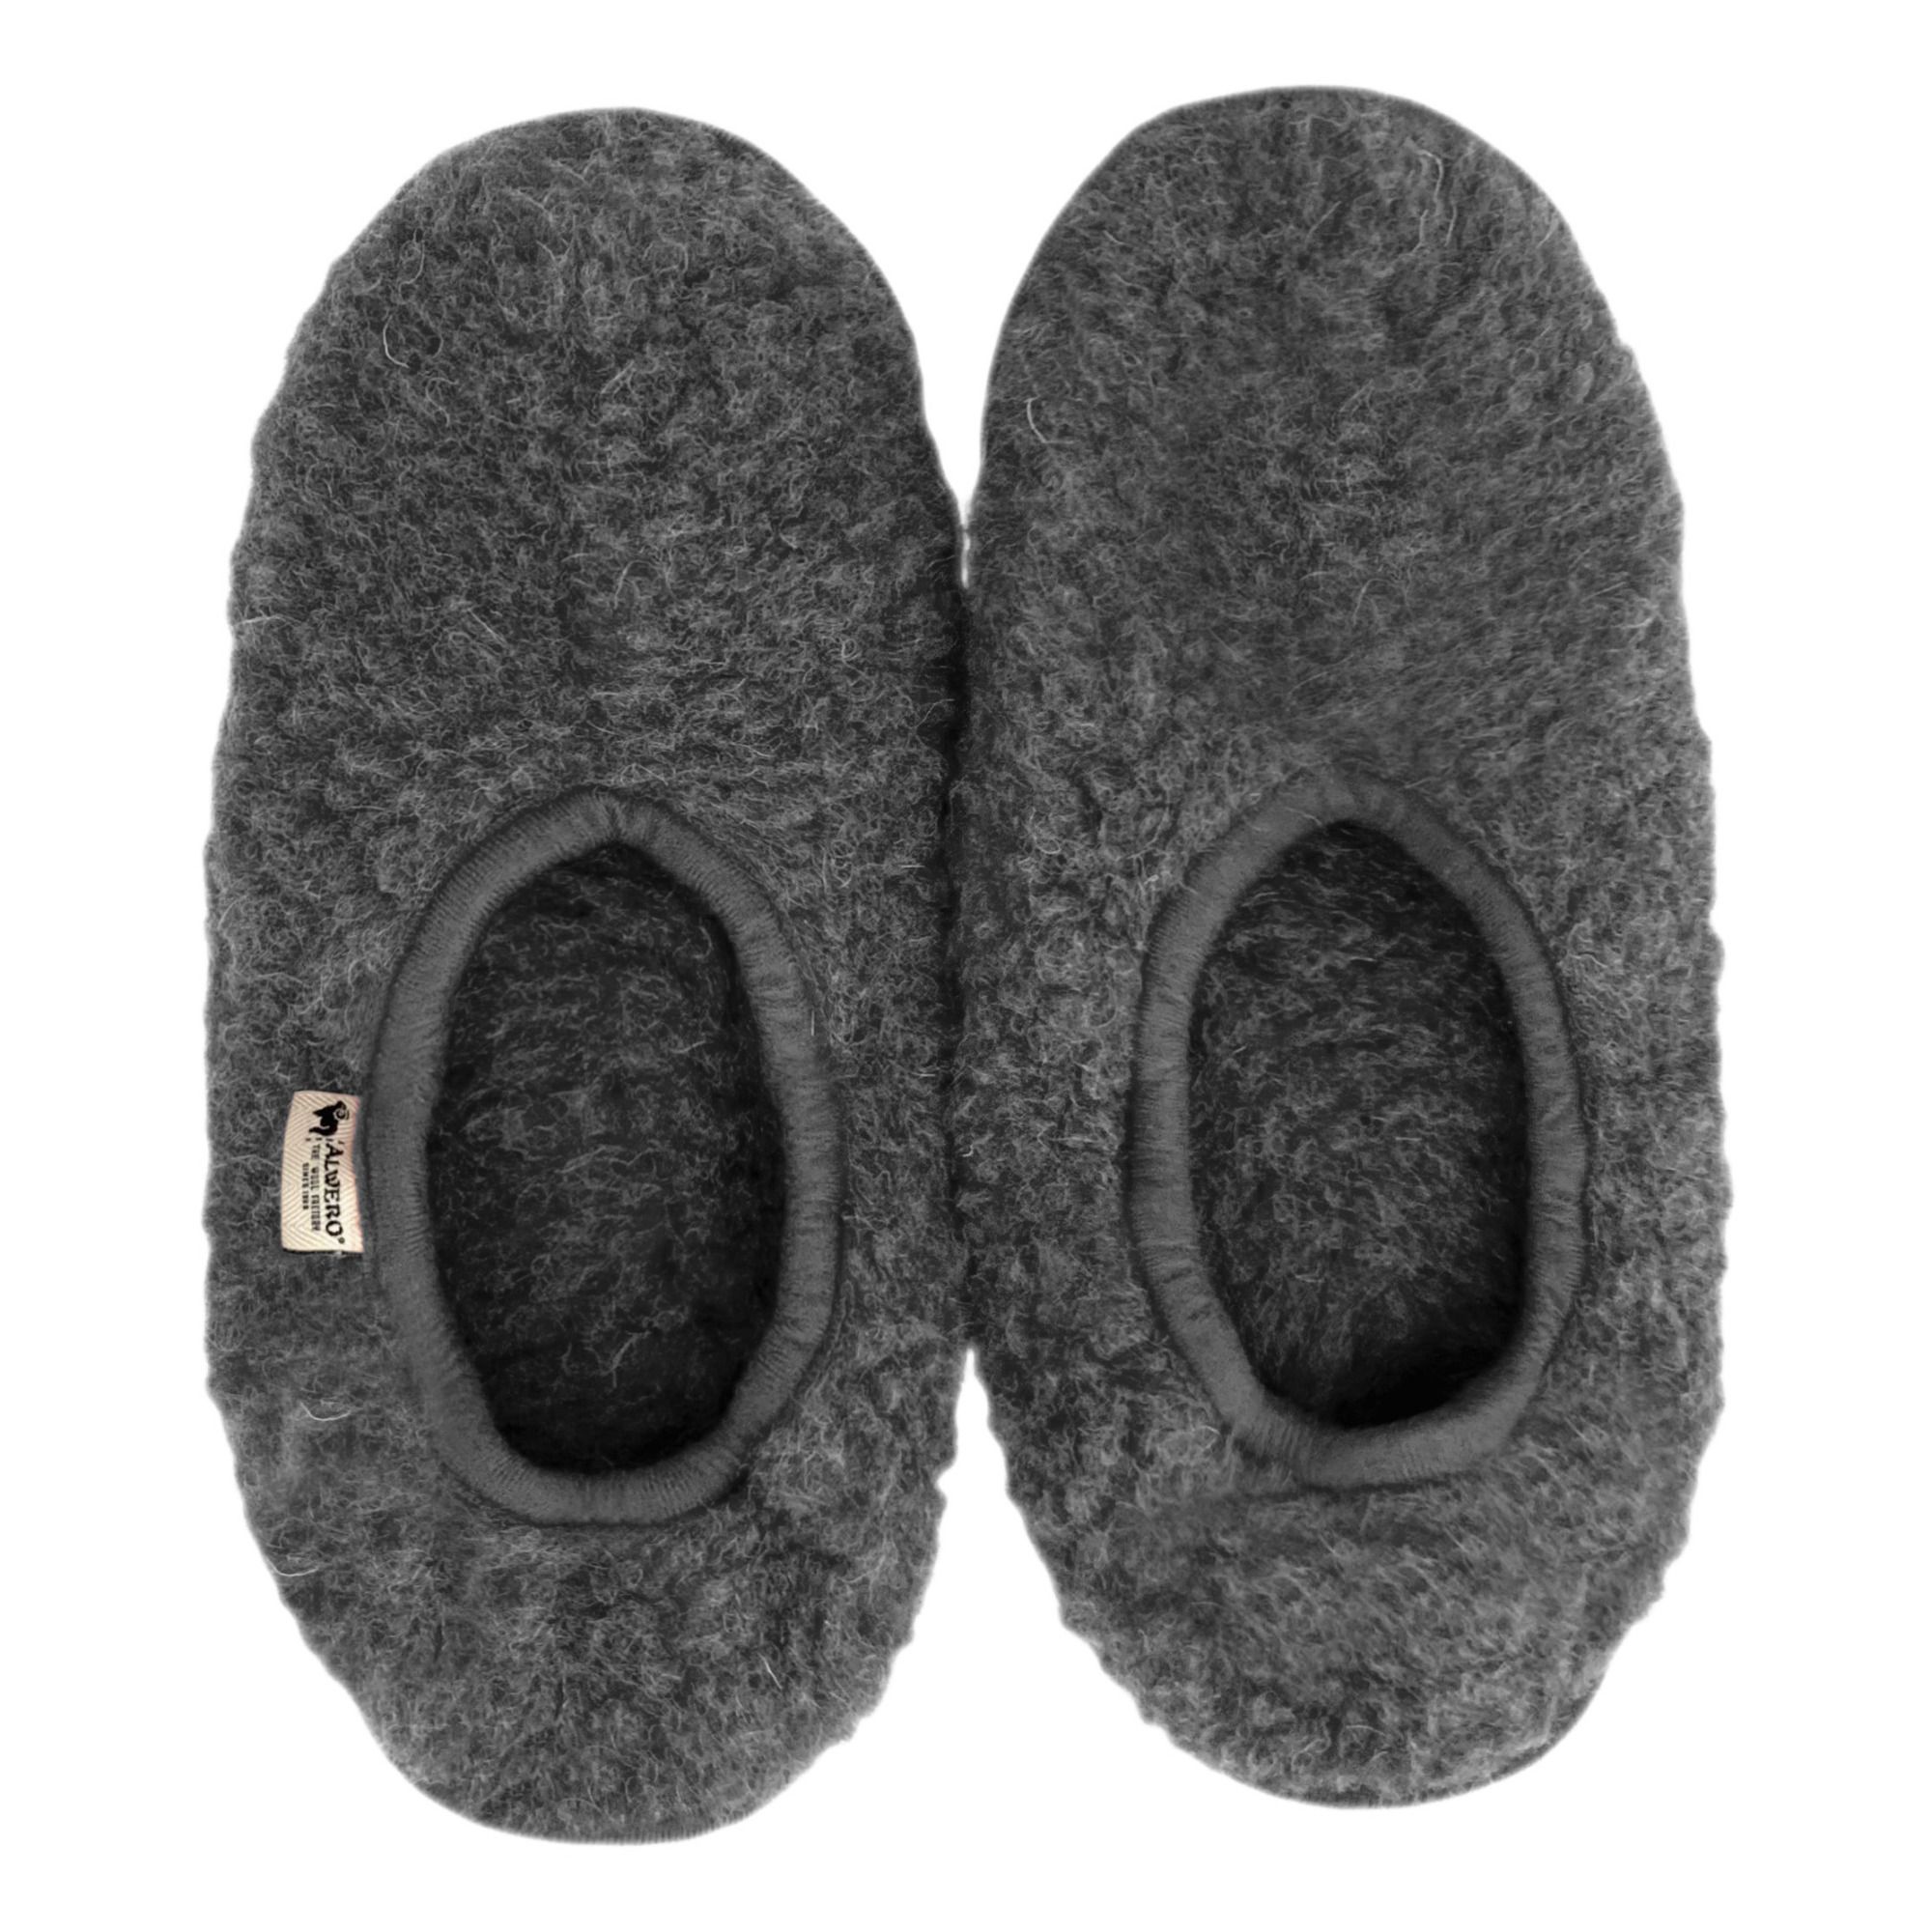 Alwero - Chaussons Shearling - Fille - Gris